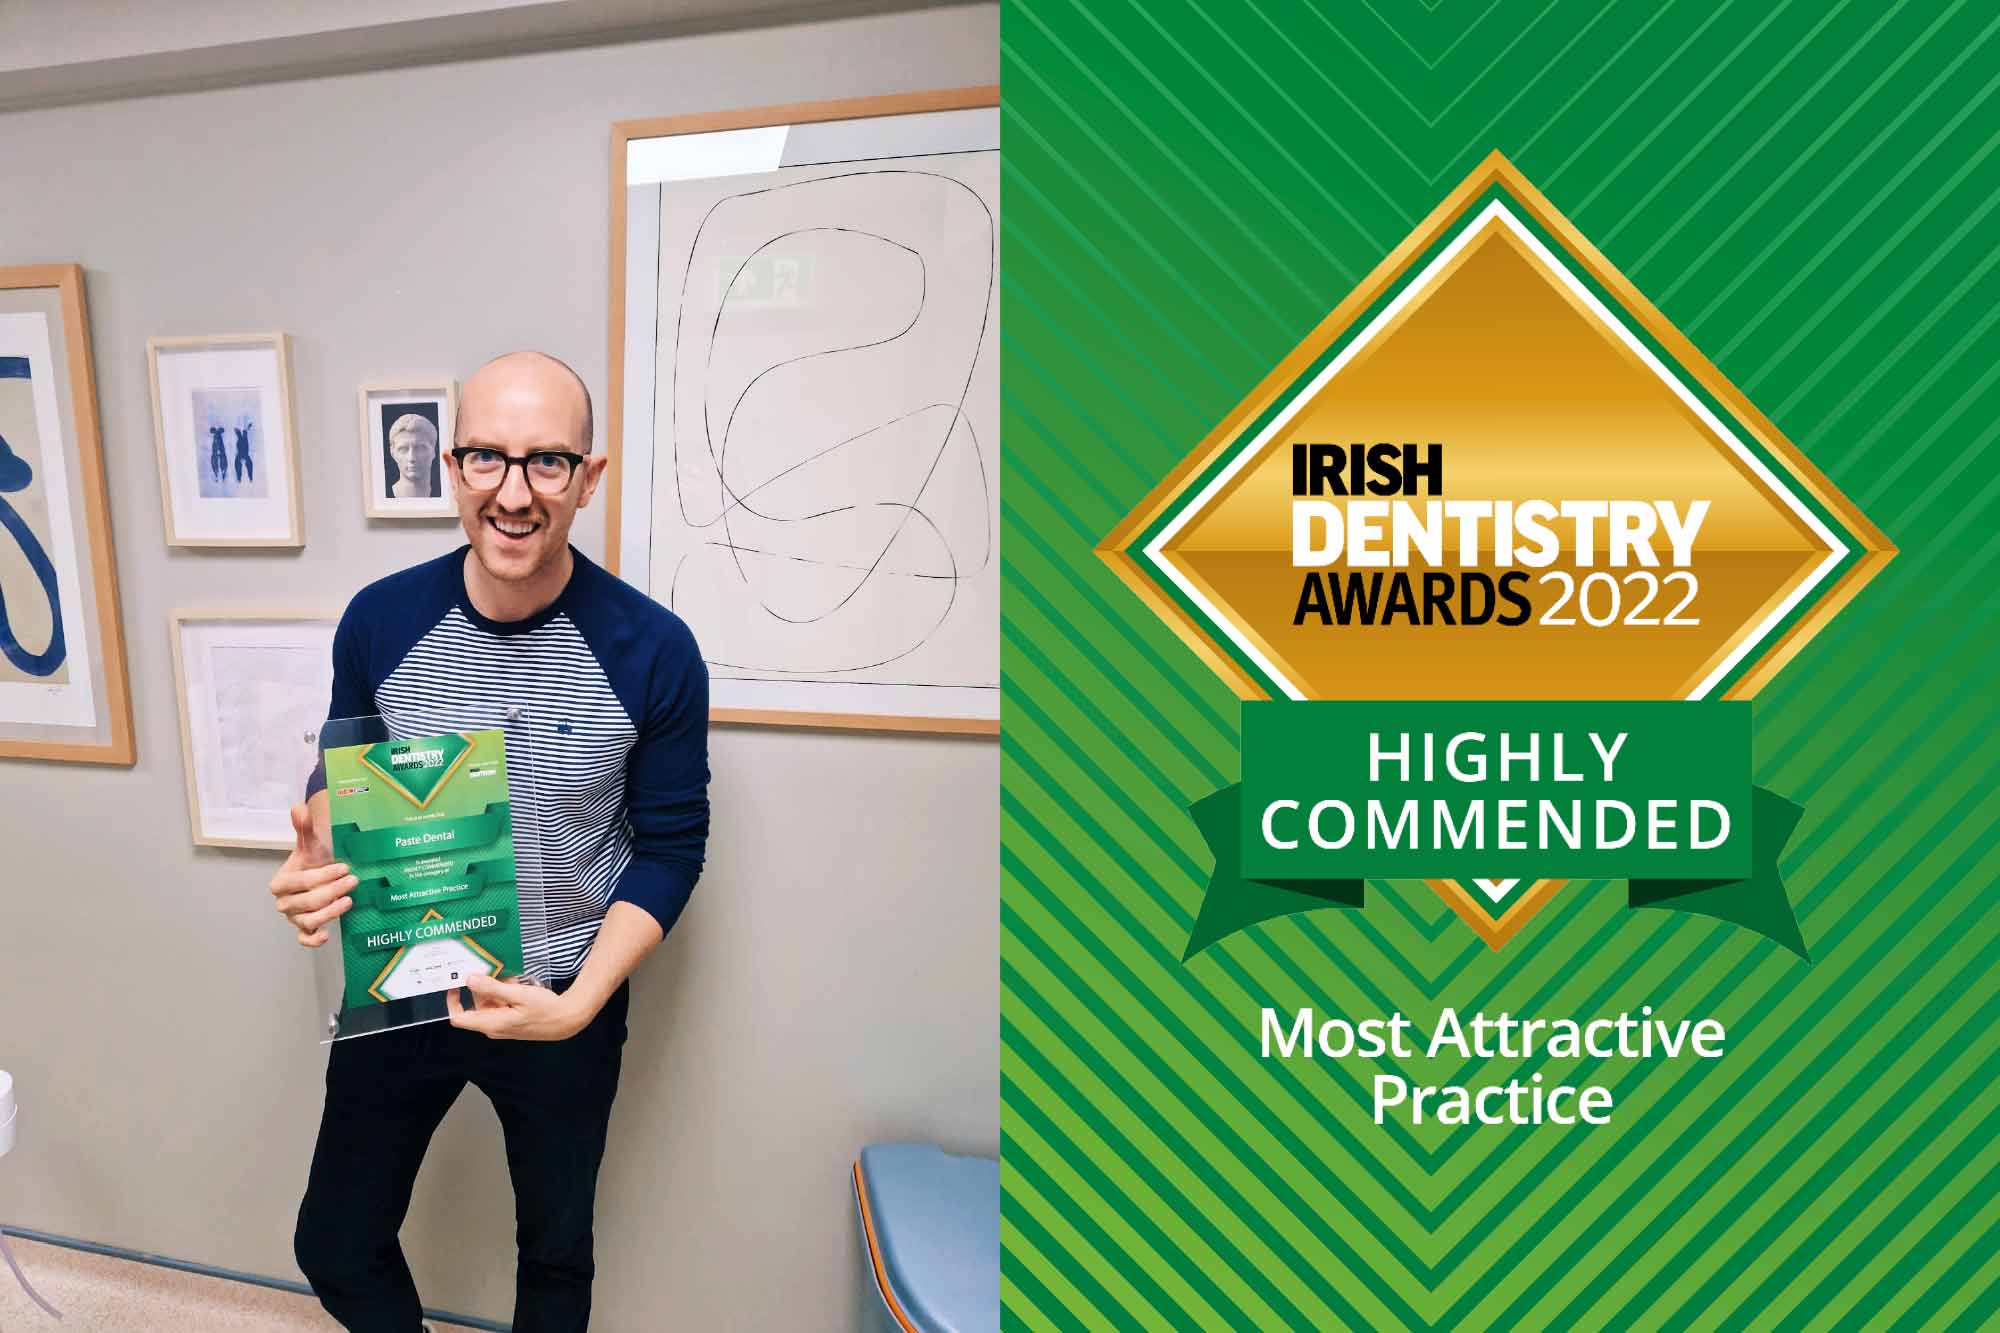 Alan Clarke, highly commended at the Irish Dentistry Awards